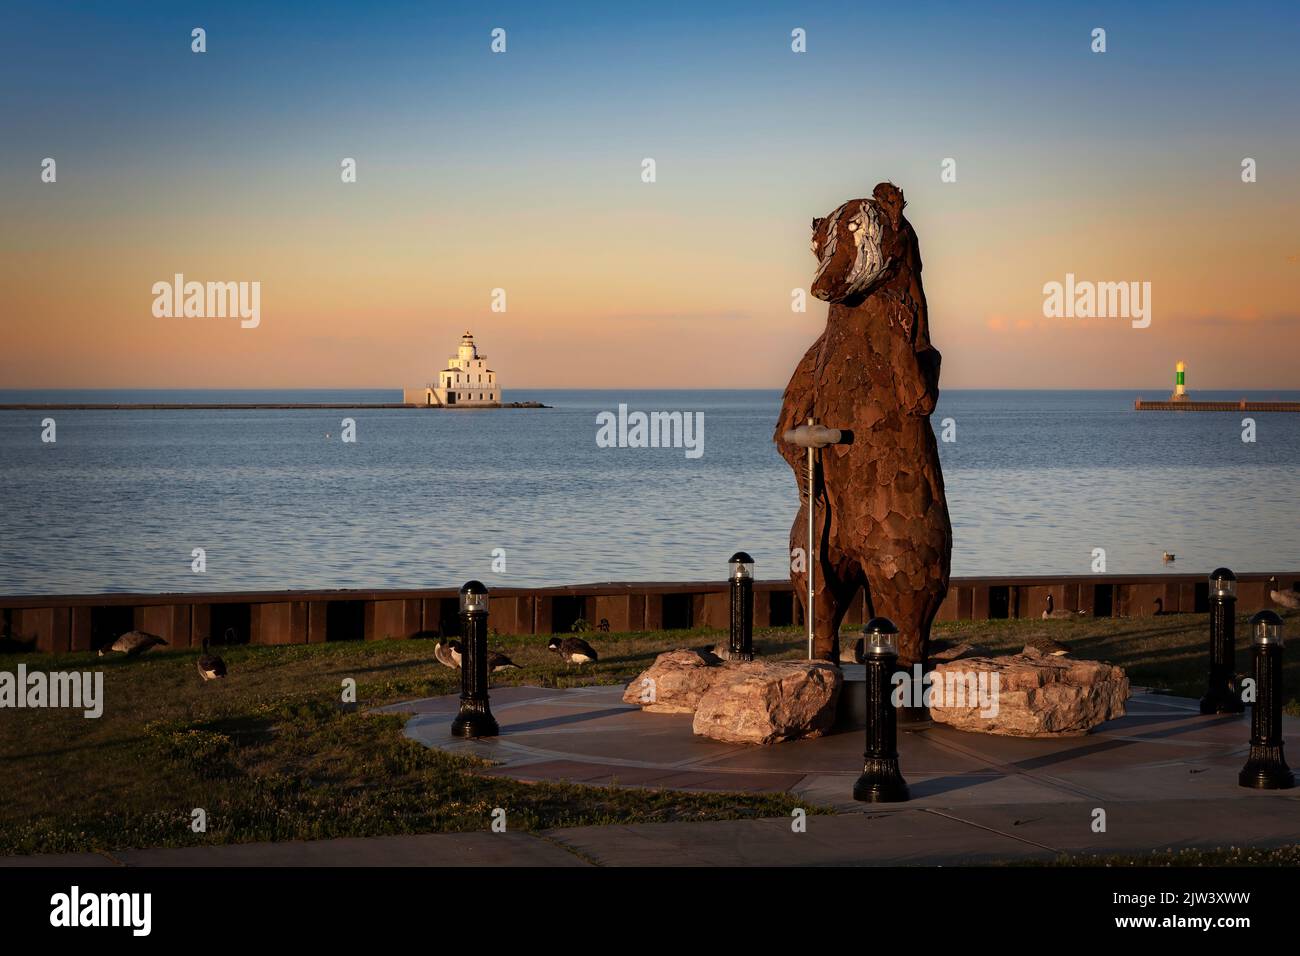 The sun sets on Shipbuilder, a 12-foot tall badger statue, created by sculpter Carl Vanderheyden standing at the harbor in Manitowoc, Wisconsin. Stock Photo